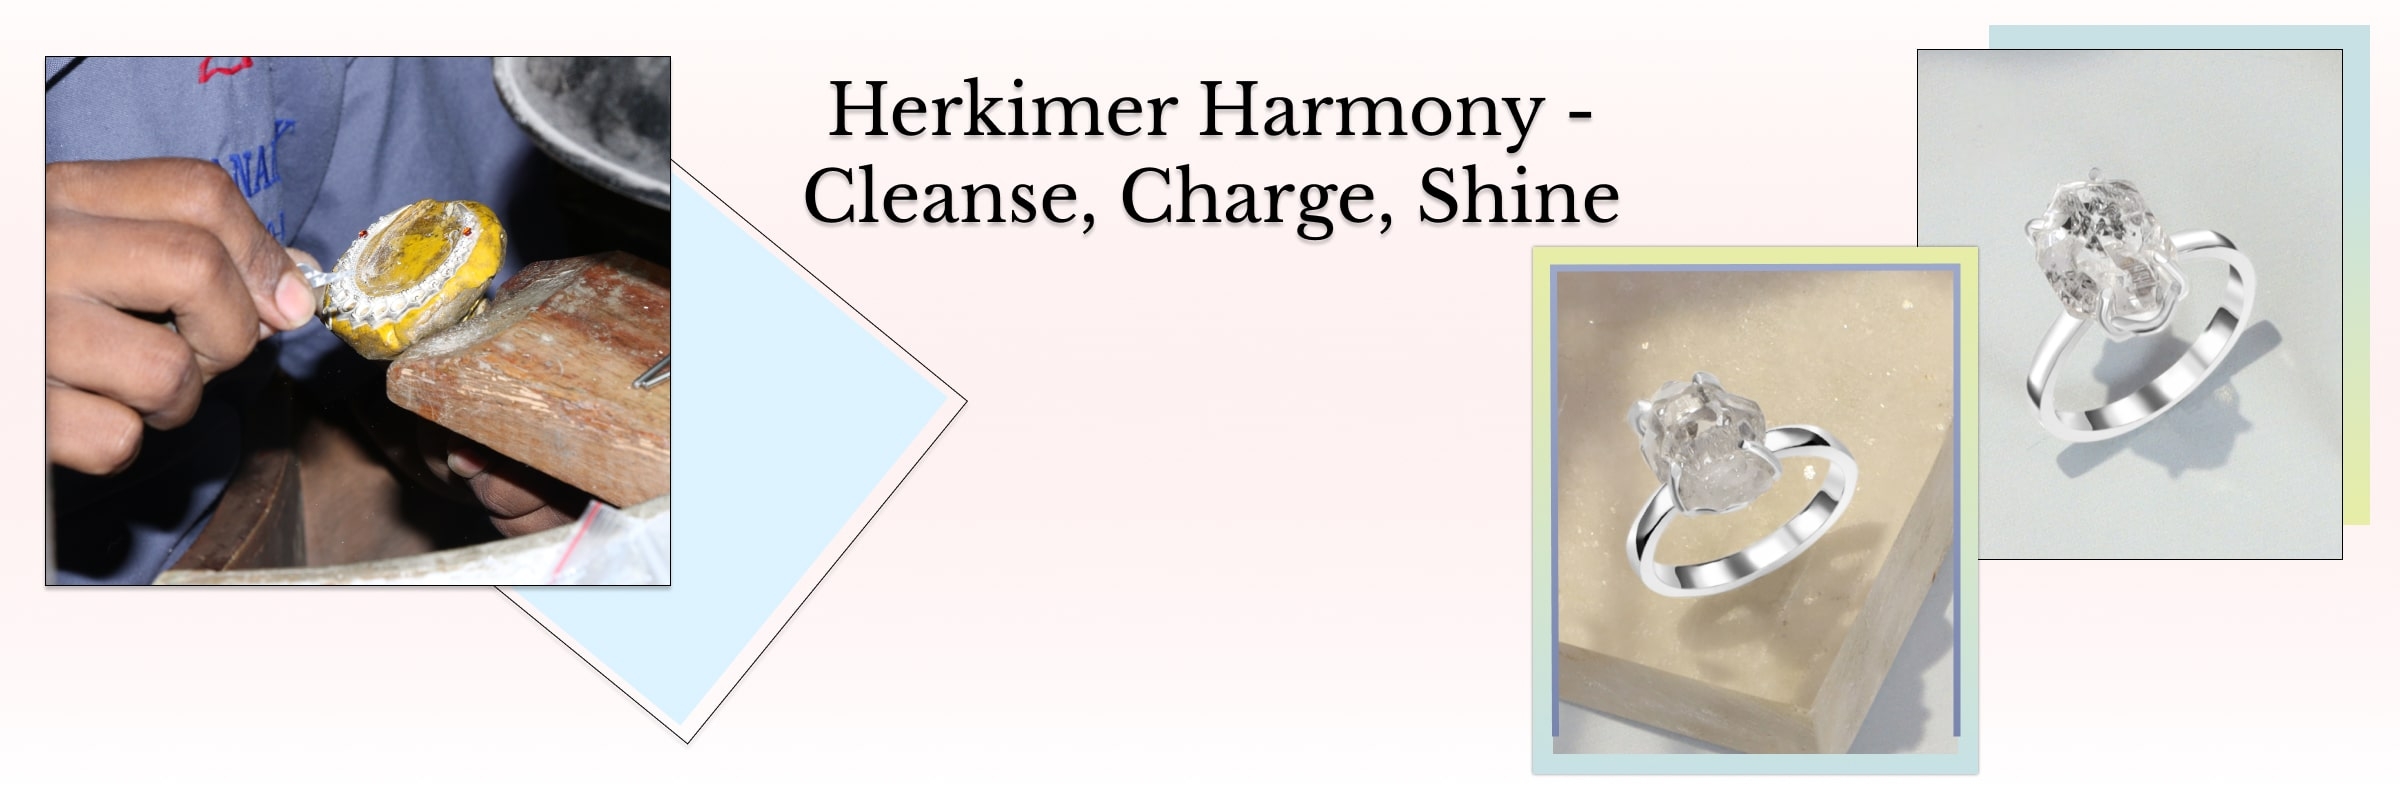 Cleansing and Charging Herkimer Diamond Jewelry